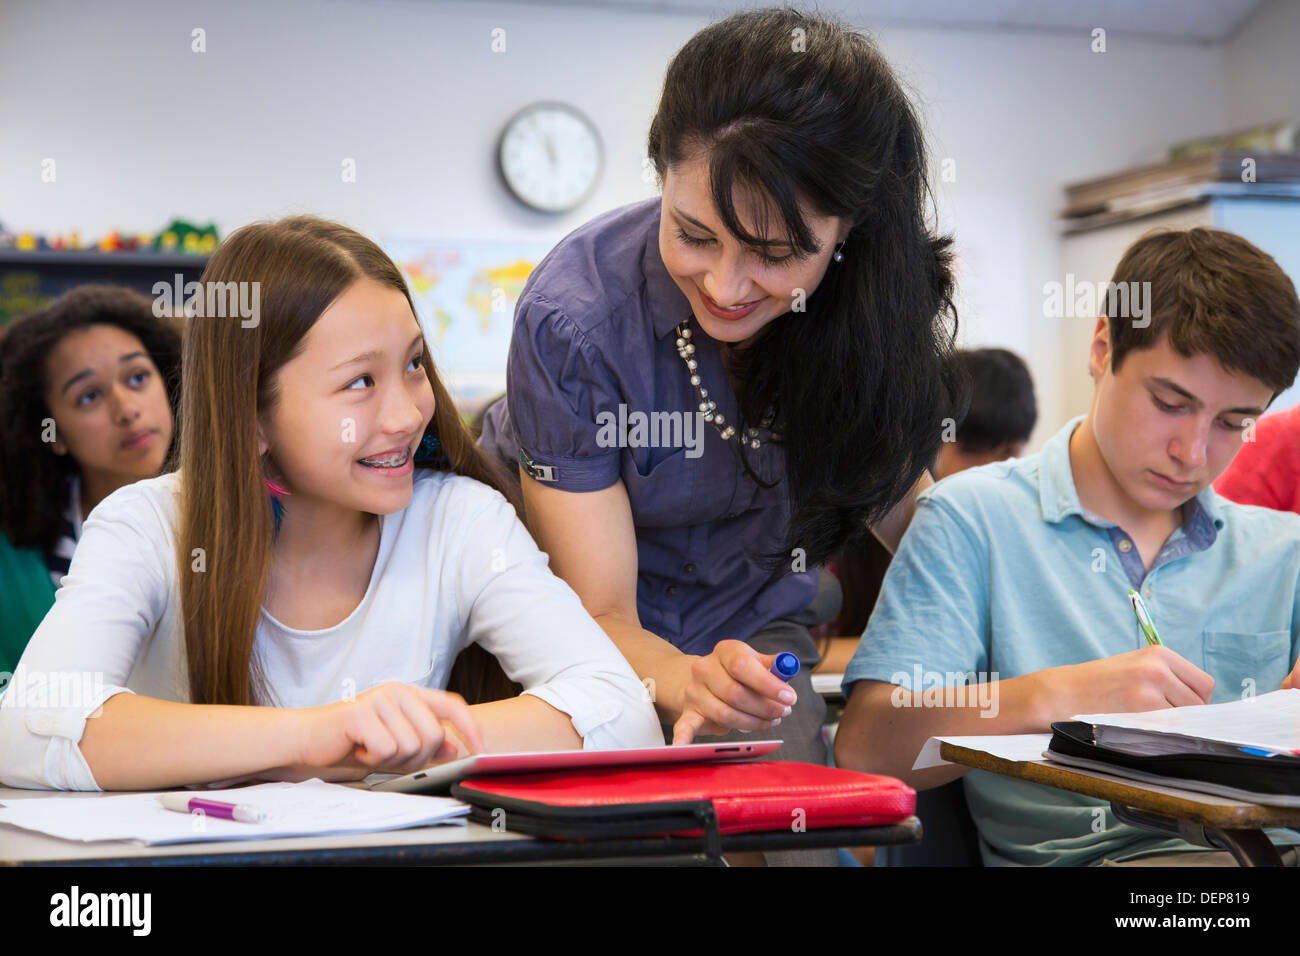 Teacher helping students in class Stock Photo